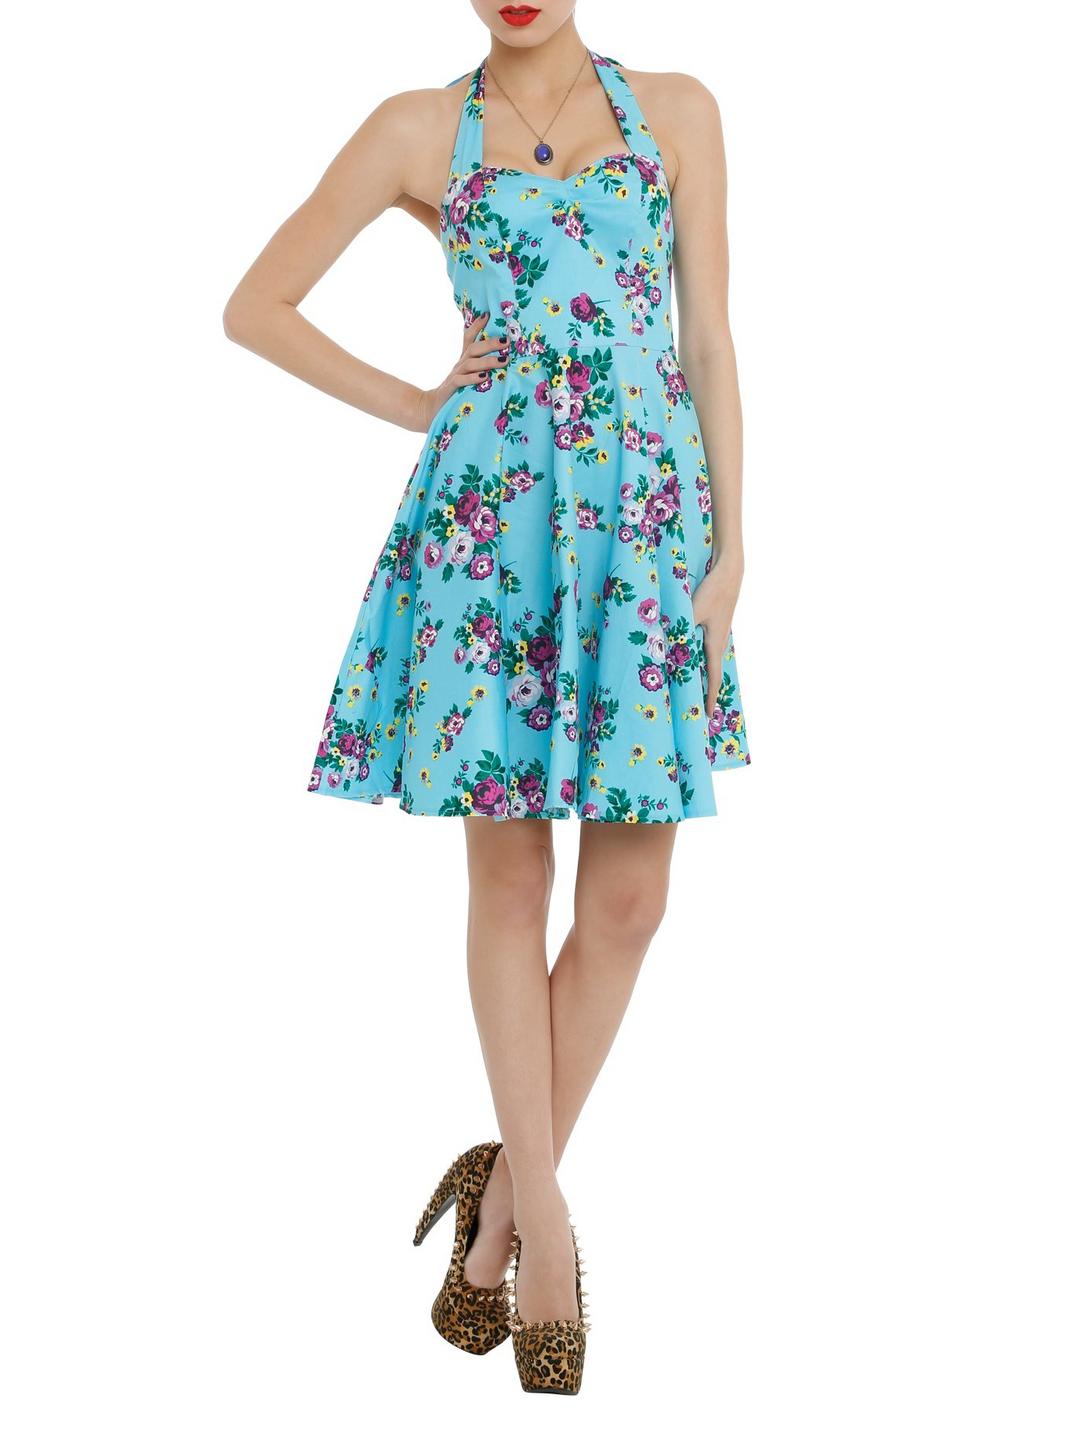 Hell Bunny Turquoise Floral Halter Dress, TURQUOISE, hi-res